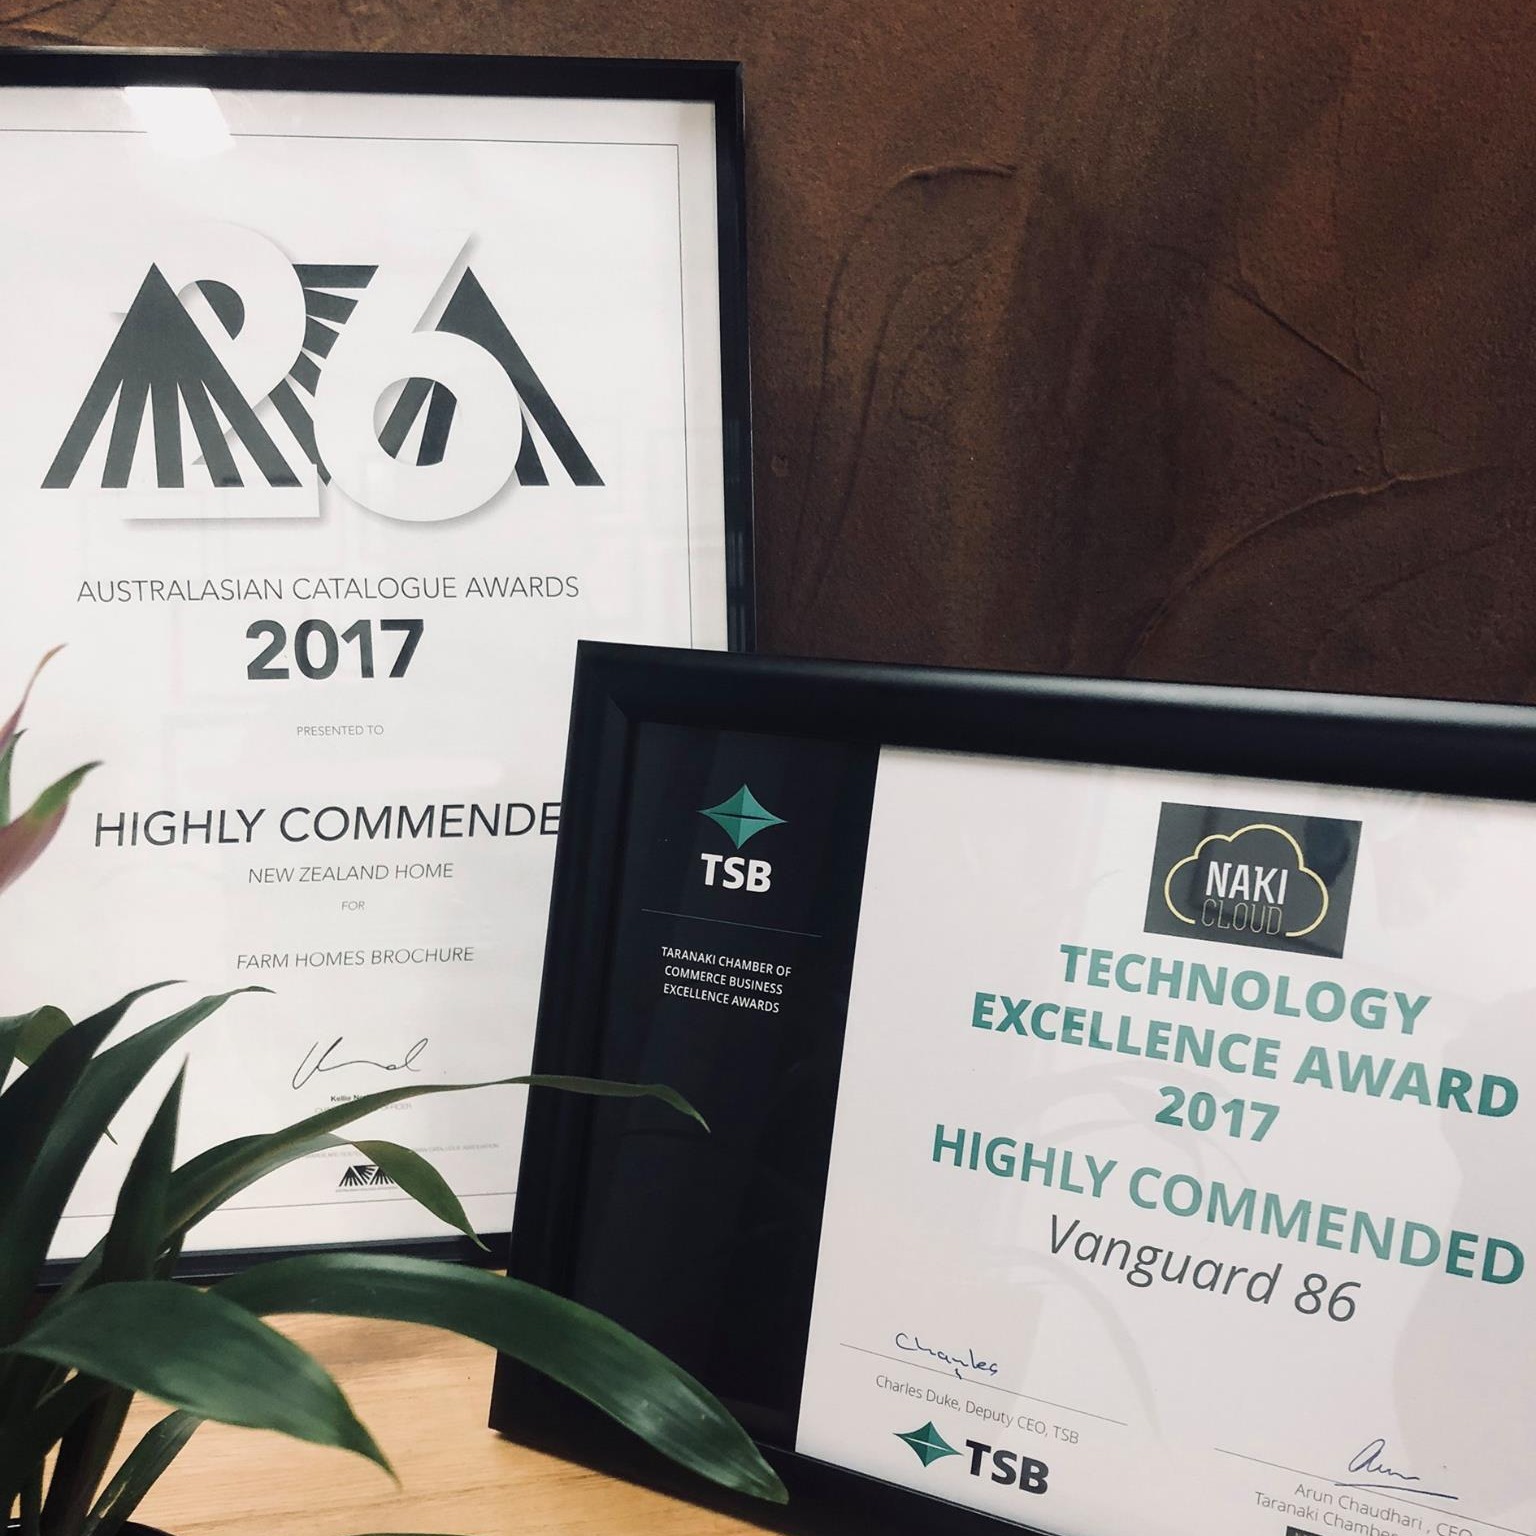 V86 wins highly commended in the Australian catalogue awards 2017